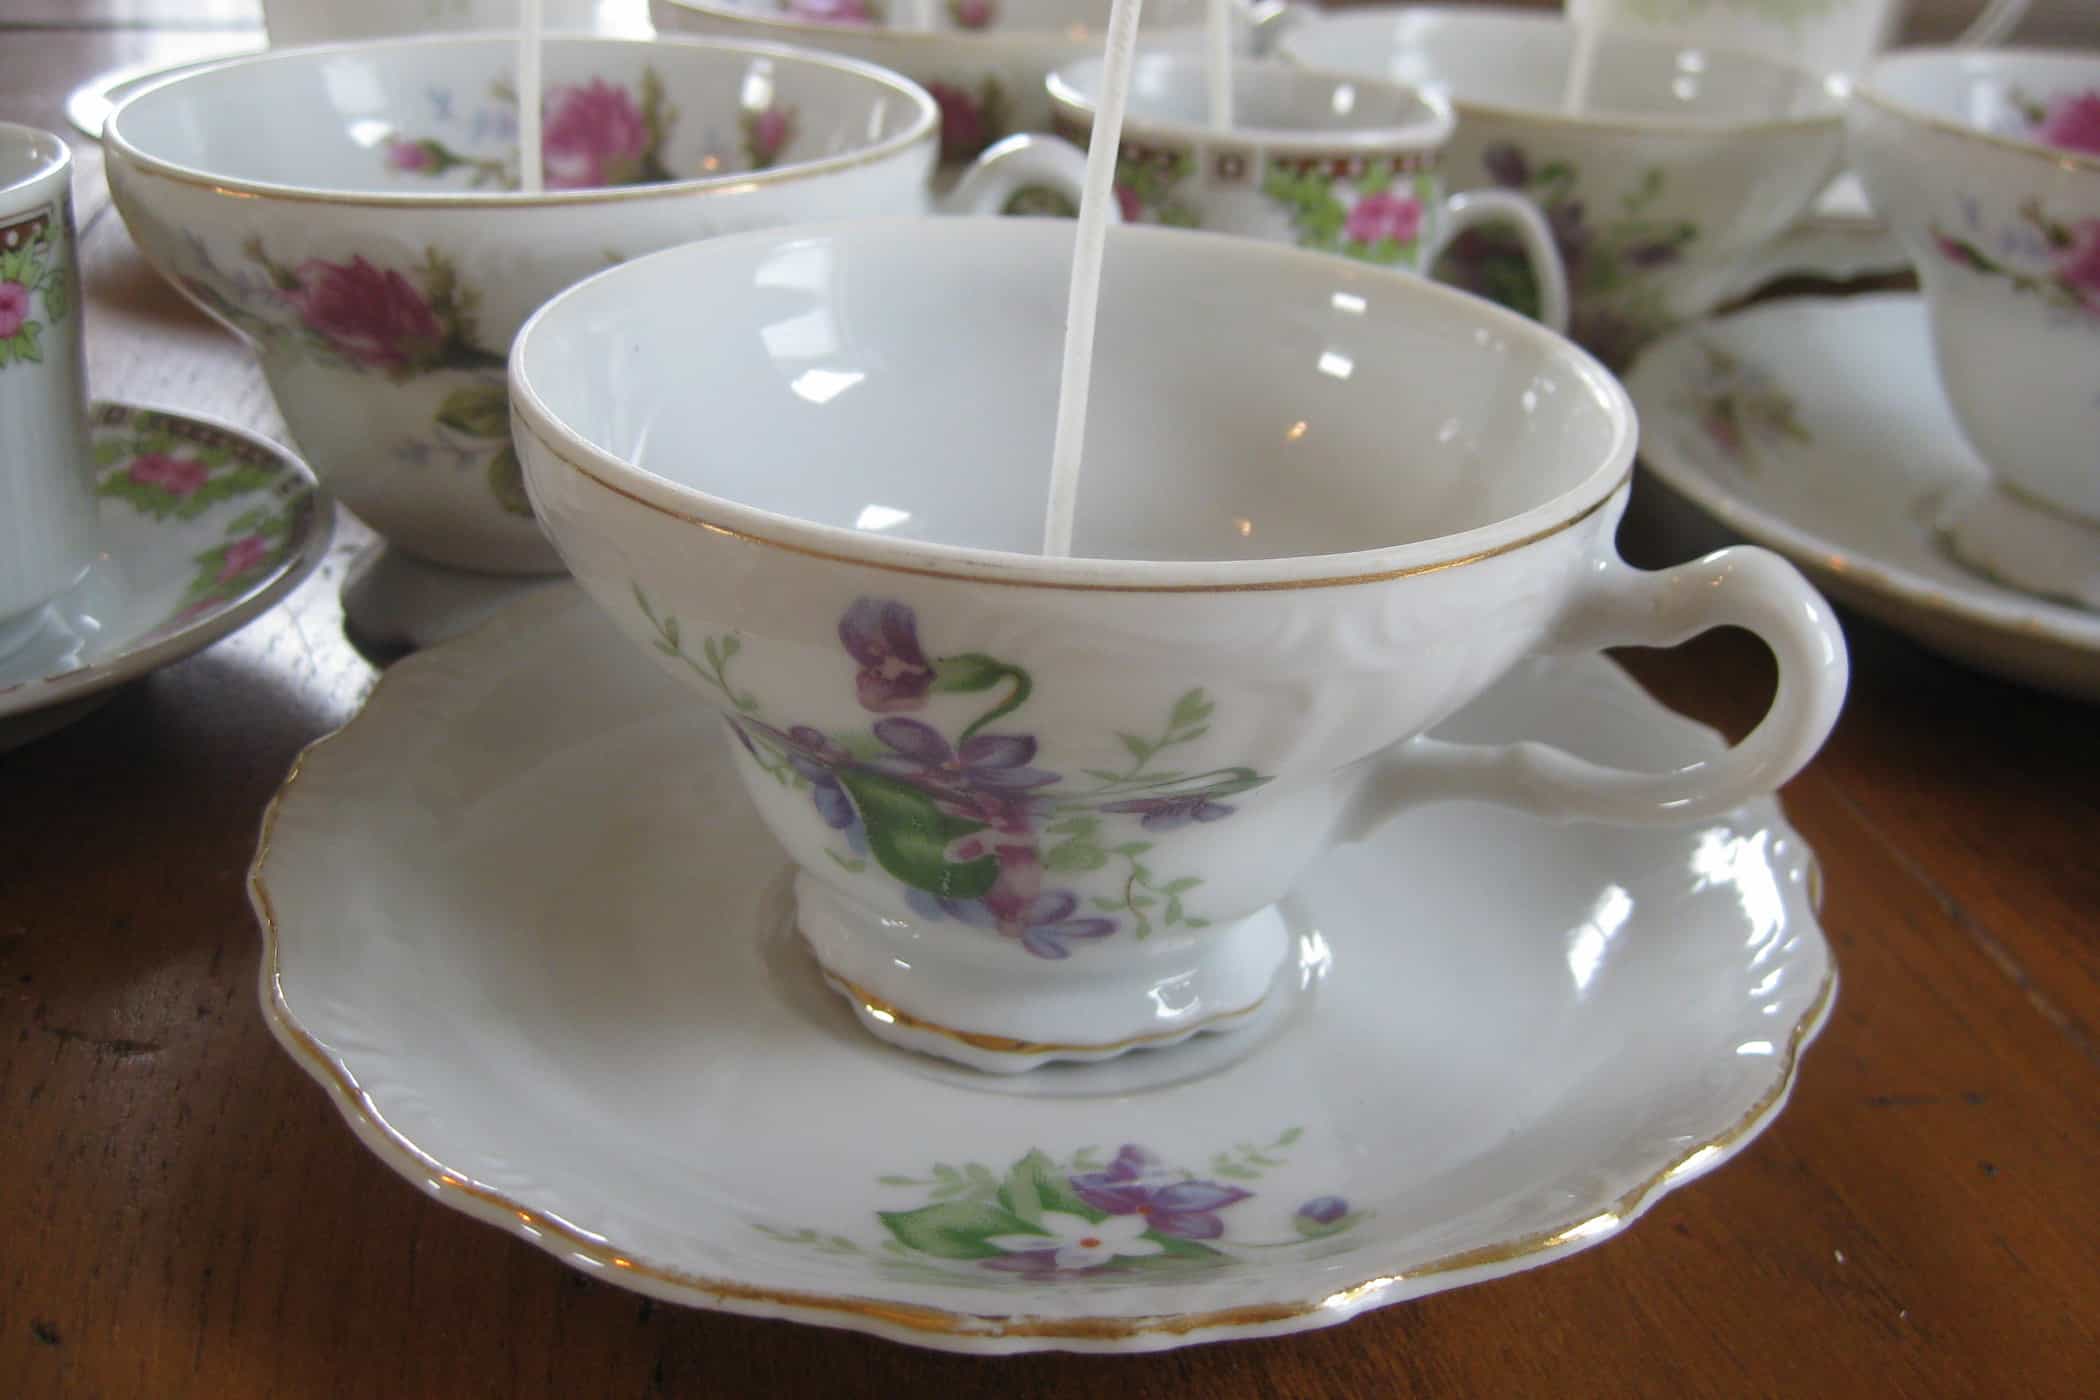 floral teacups on table with wicks